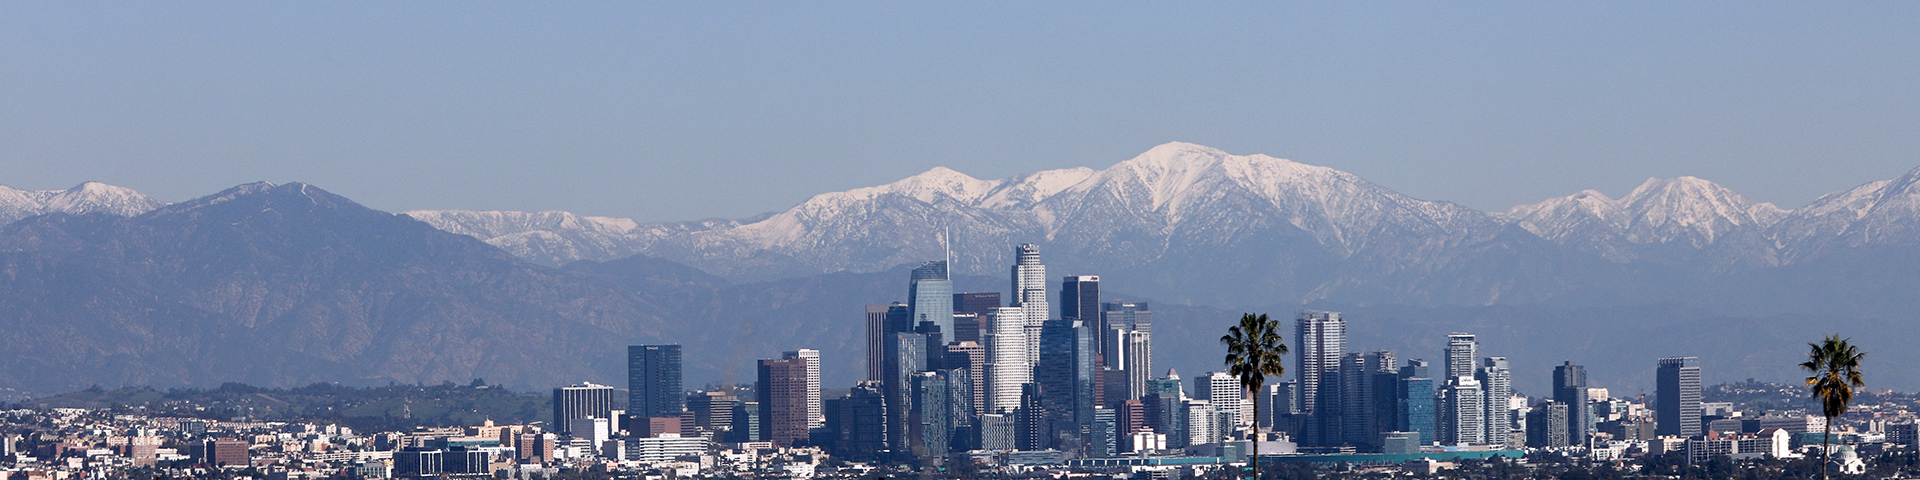 City skyline with snow-capped mountains behind.